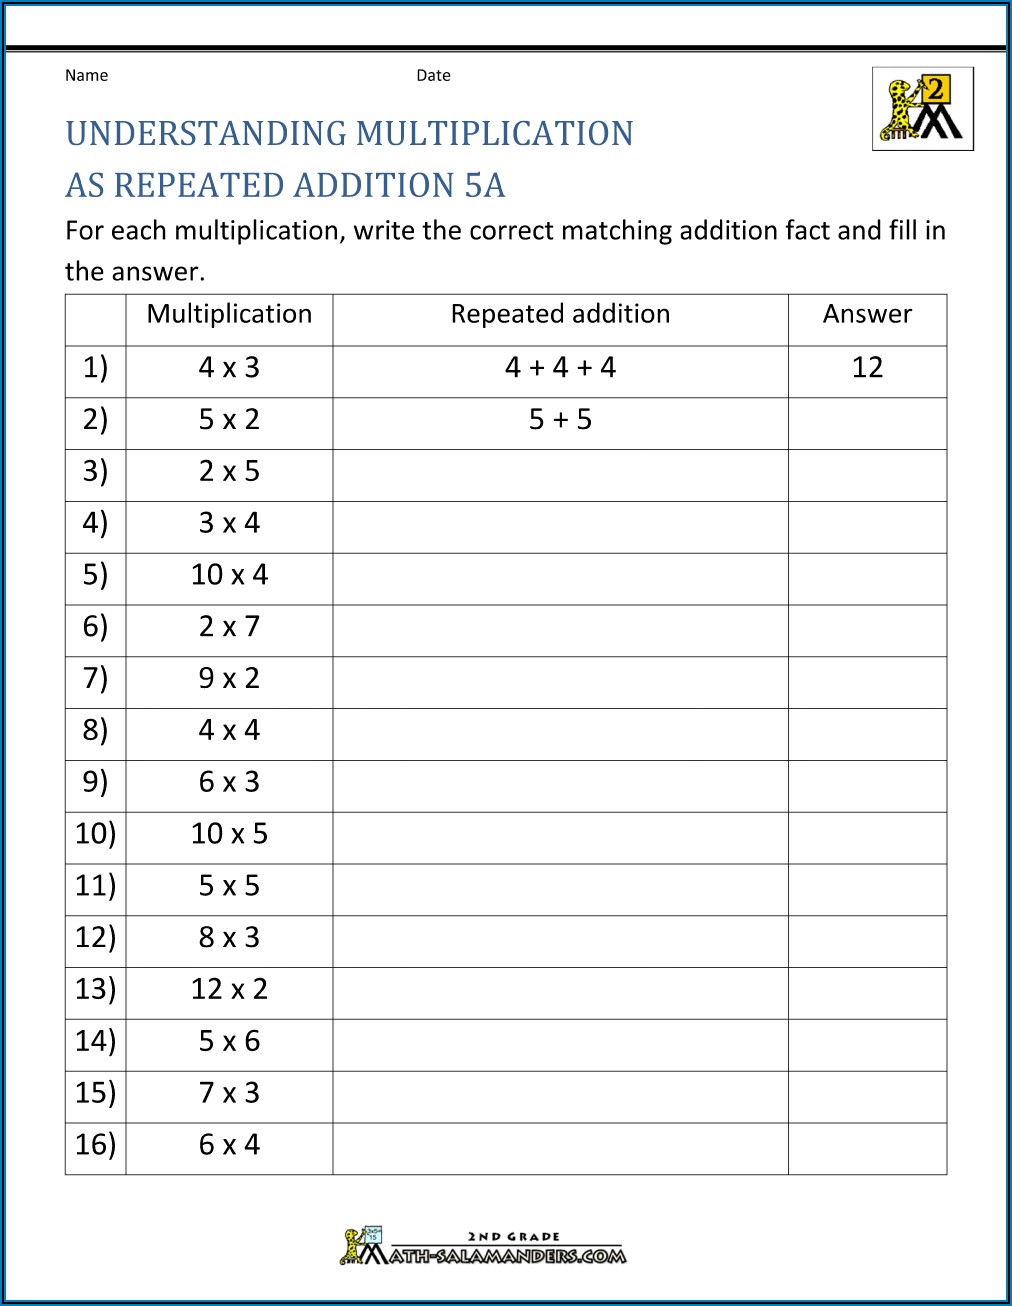 Multiplication As Repeated Addition Worksheet Pdf